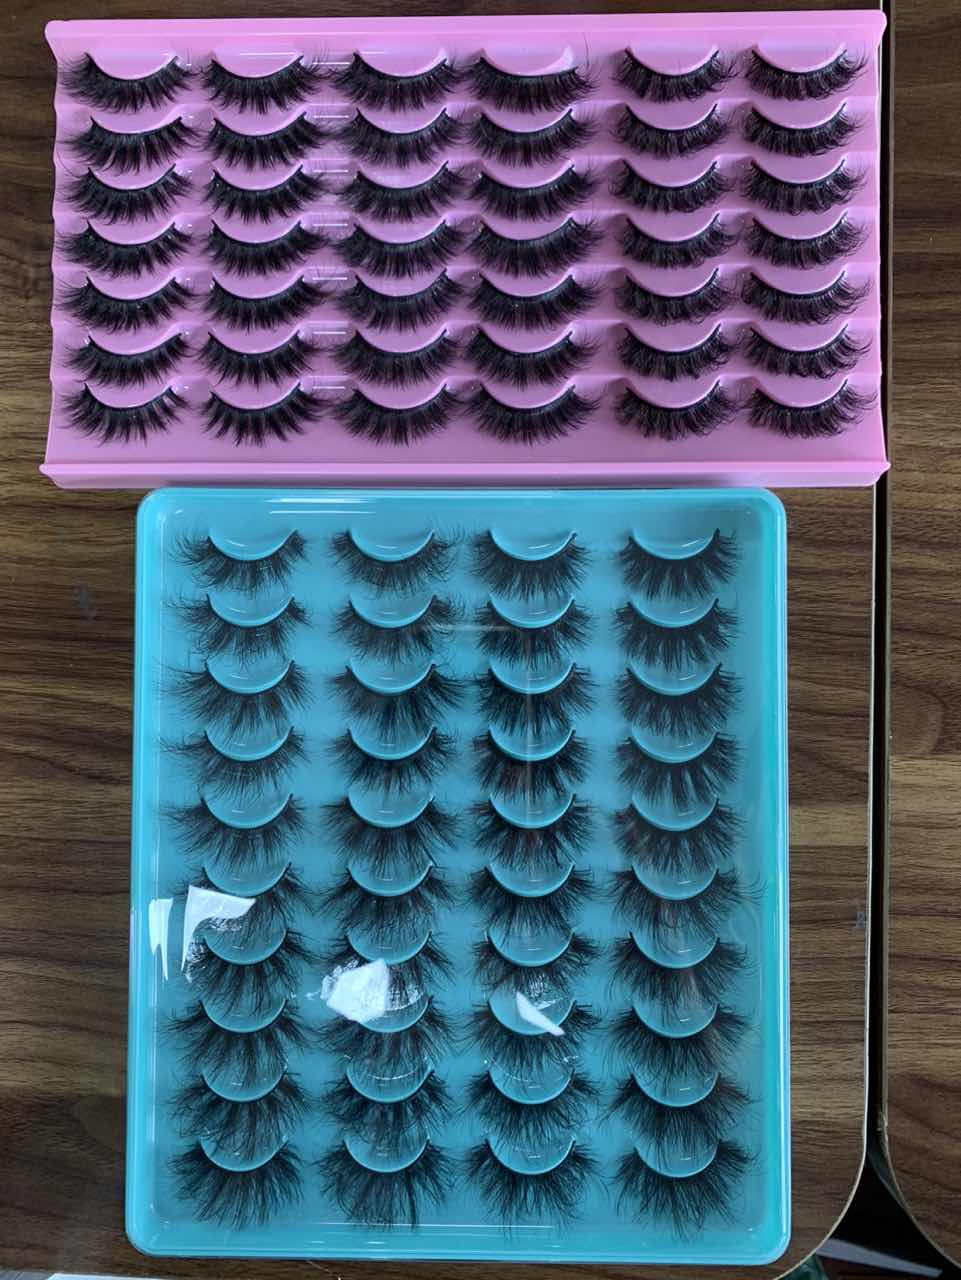 2 packs of lashes